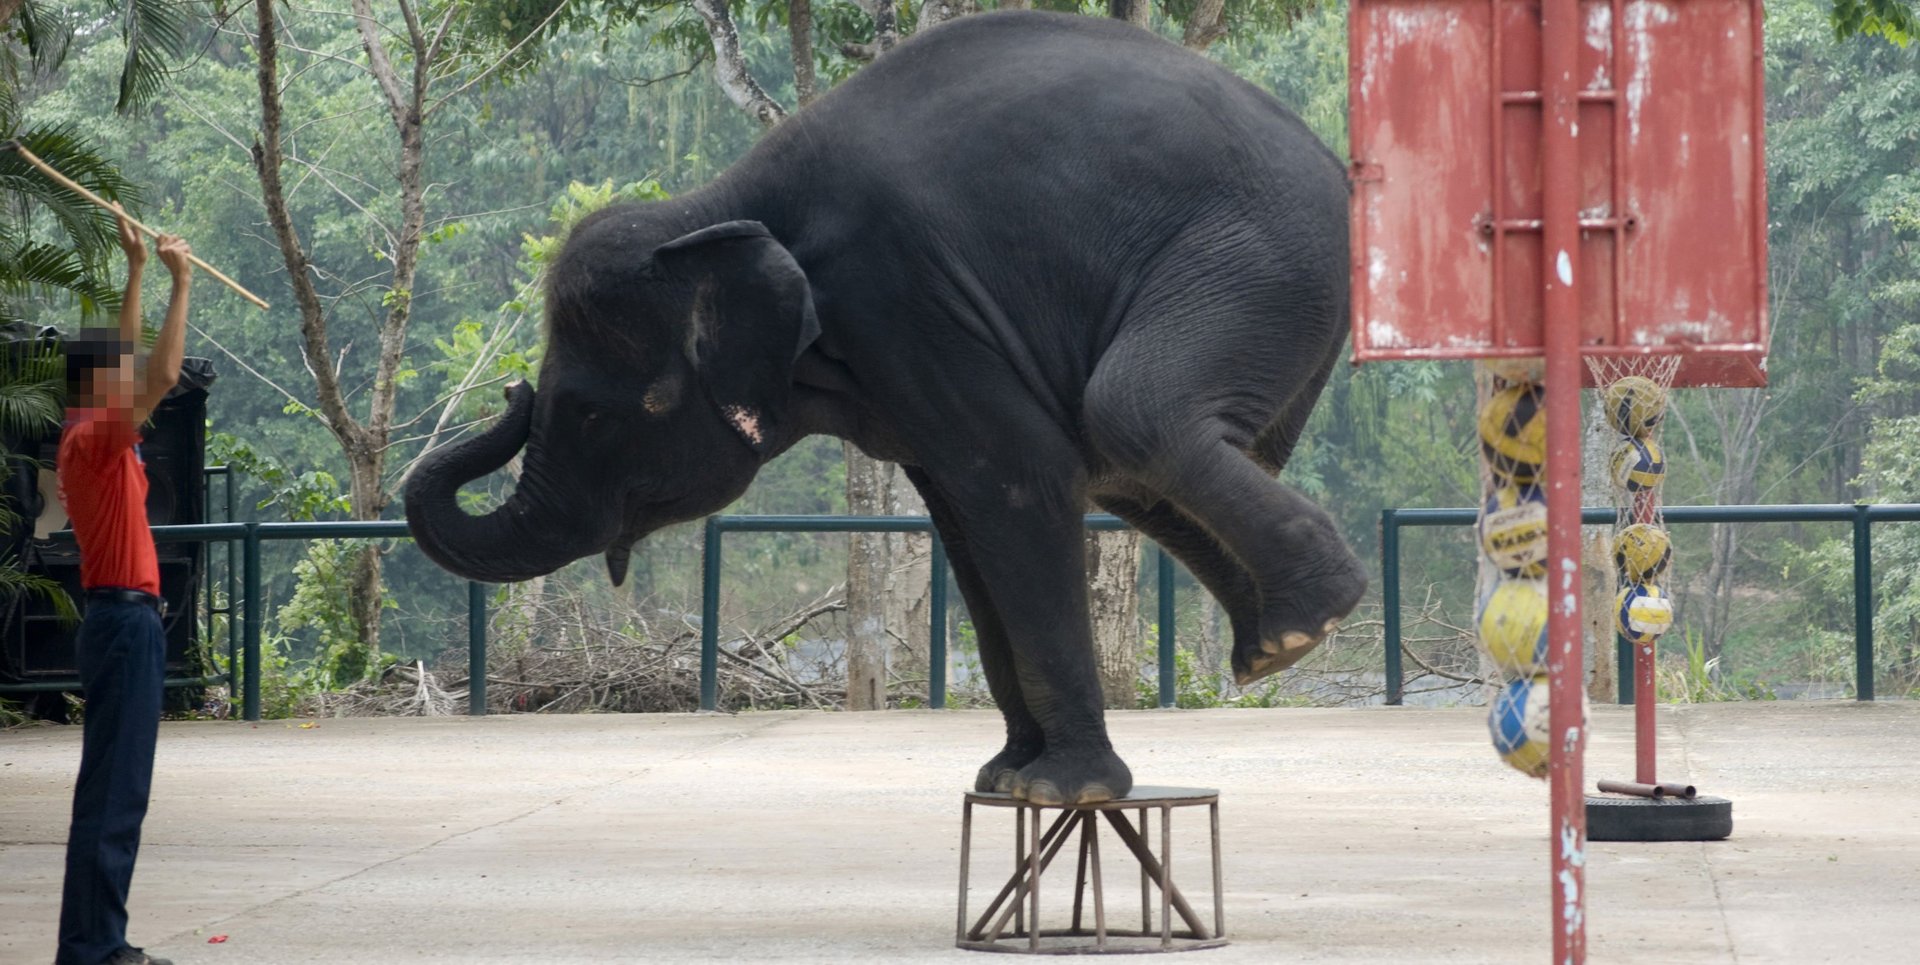 A mahout steers an elephant in a show at a zoo in Thailand